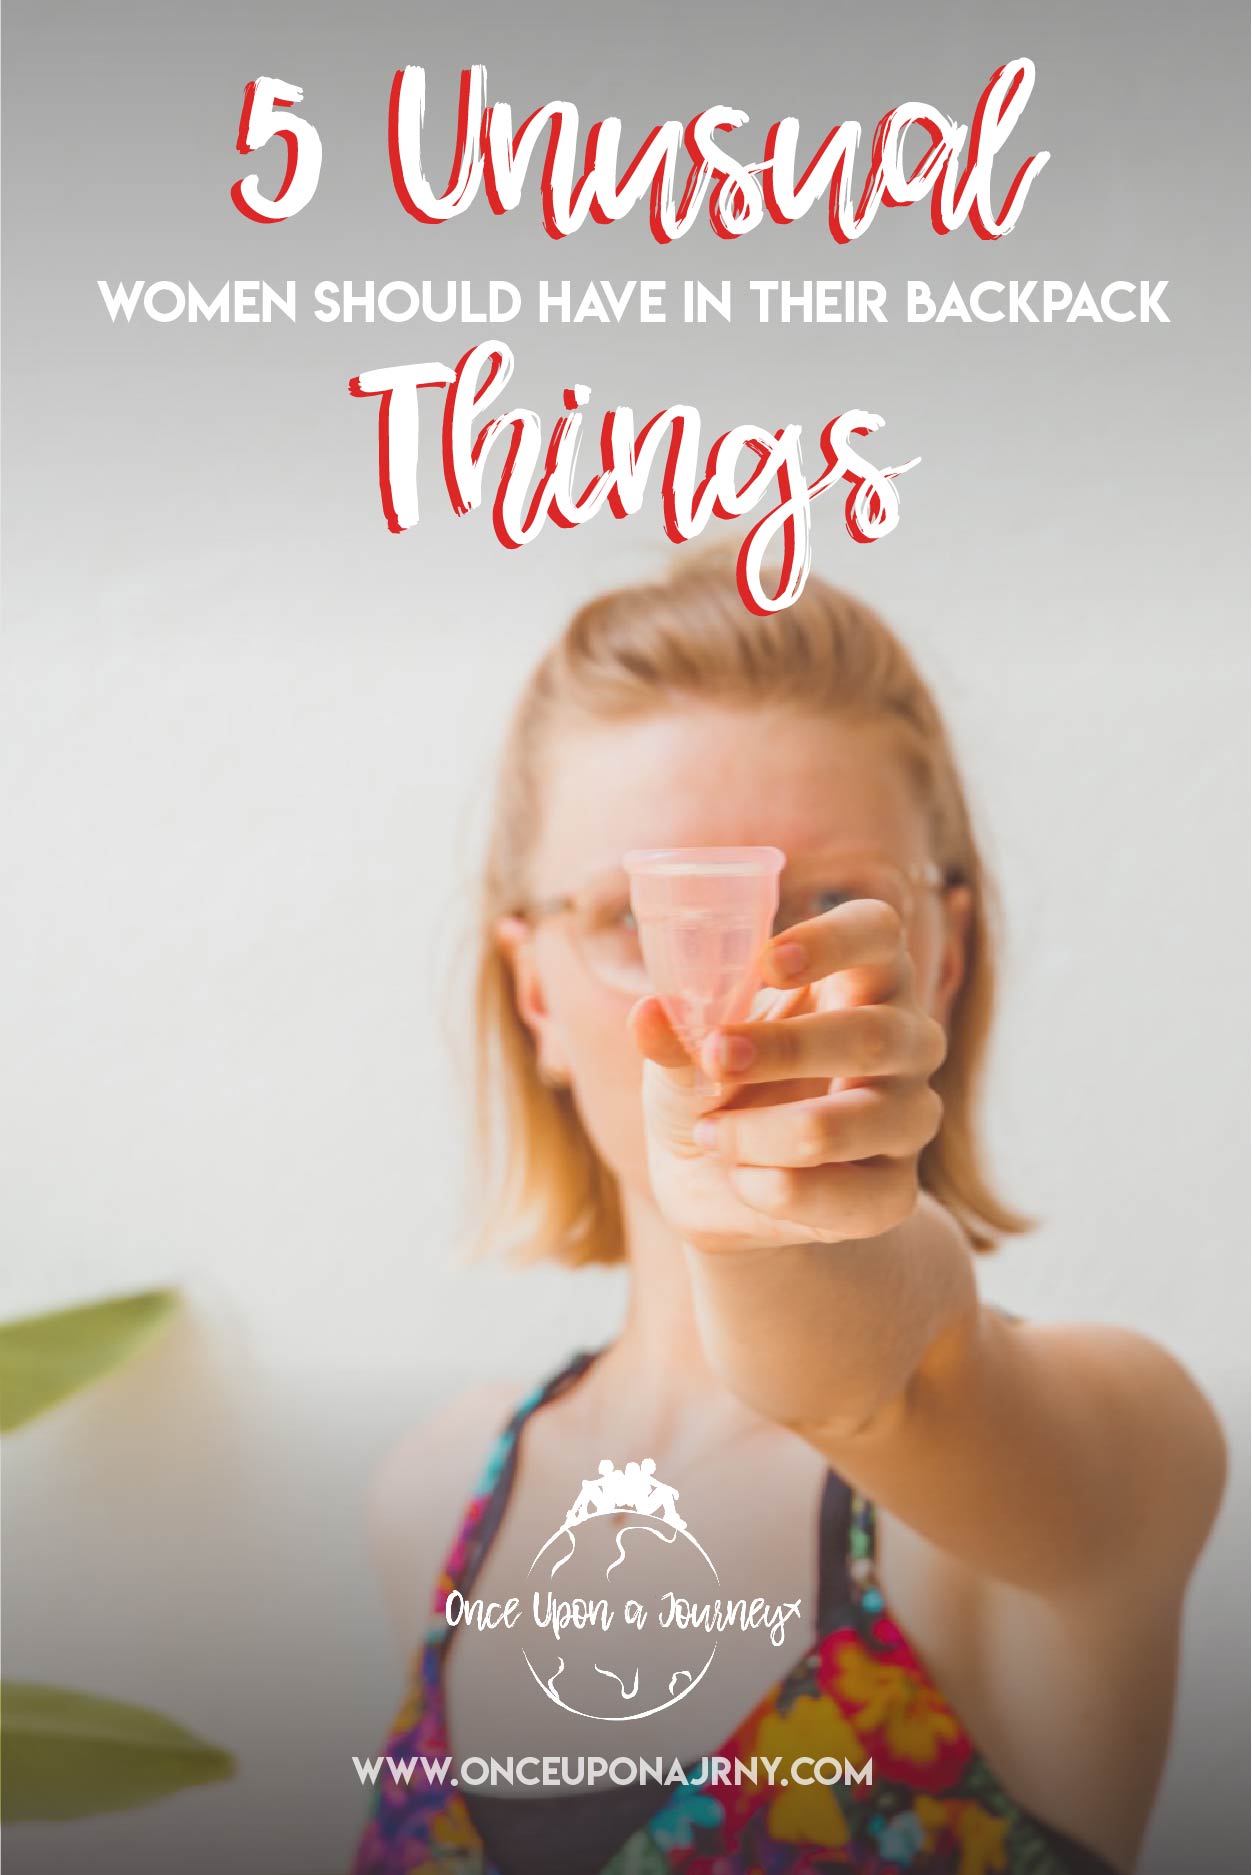 5 Unusual Things Women SHOULD Have in Their Backpack | Once Upon A Journey LGBT Travel Blog #womentravel #femaletravel #menstrualcup #cup #travel